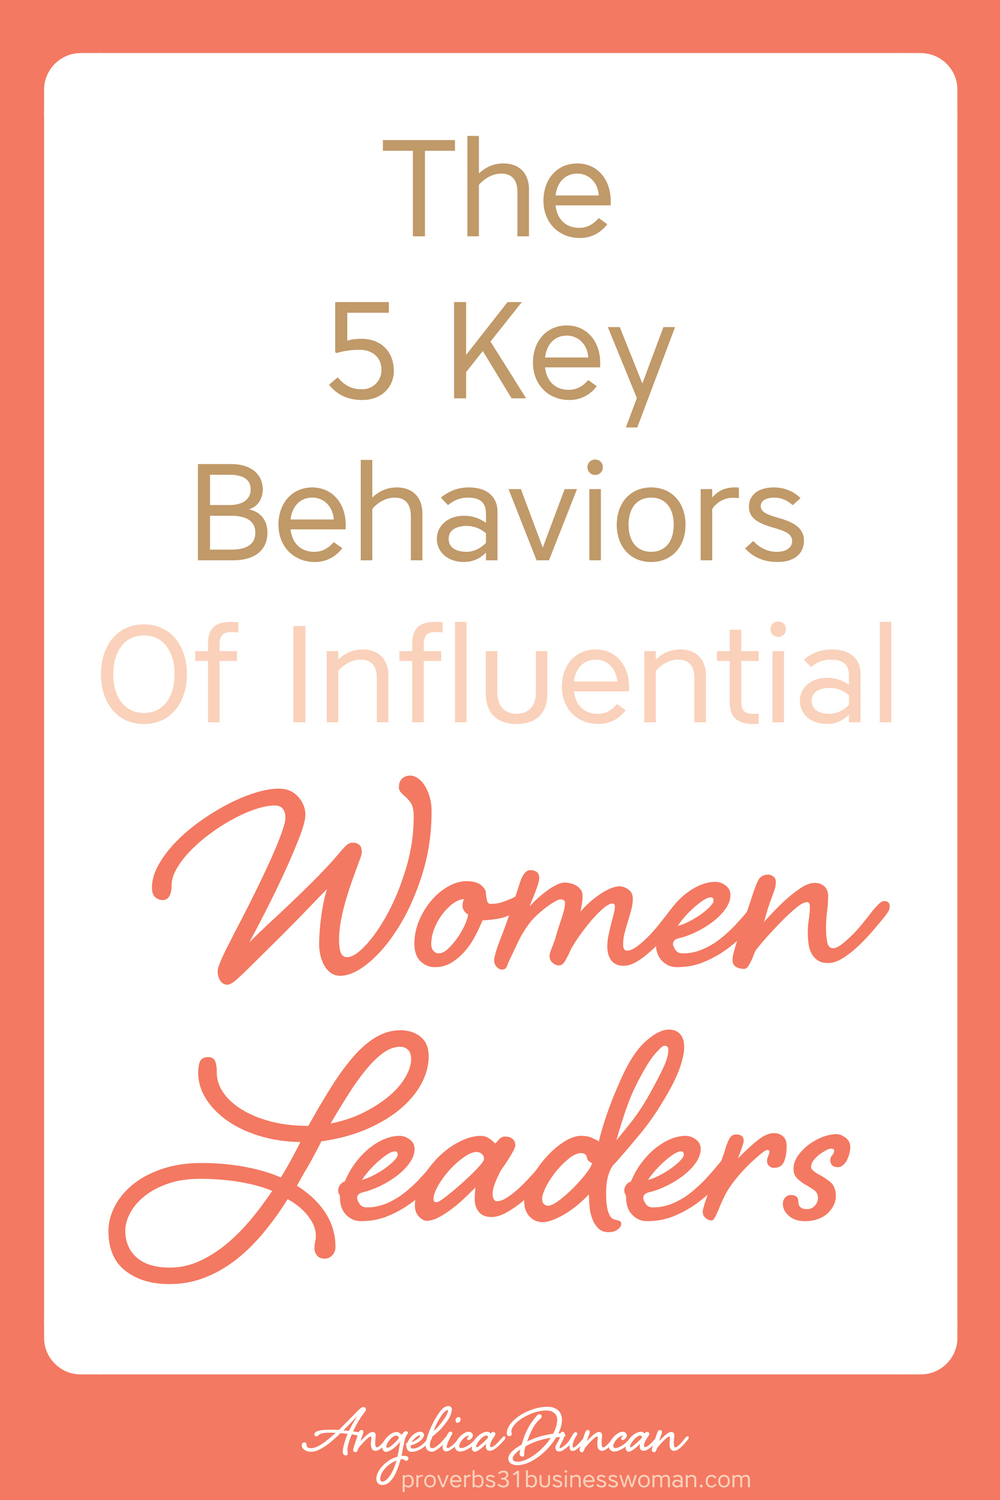 By nature women are influential. Find out how your natural design sets you up to have behaviors like influential women leaders! #mompreneur #onlinebusiness #wahm #womeninbusiness #christianbusiness #christianwomeninbusiness #christianentrepreneurs #proverbs31 #proverbs31woman #proverbs31businesswoman #proverbs31enrepreneur #p31 #angelicaduncan #silkoversteel #sos